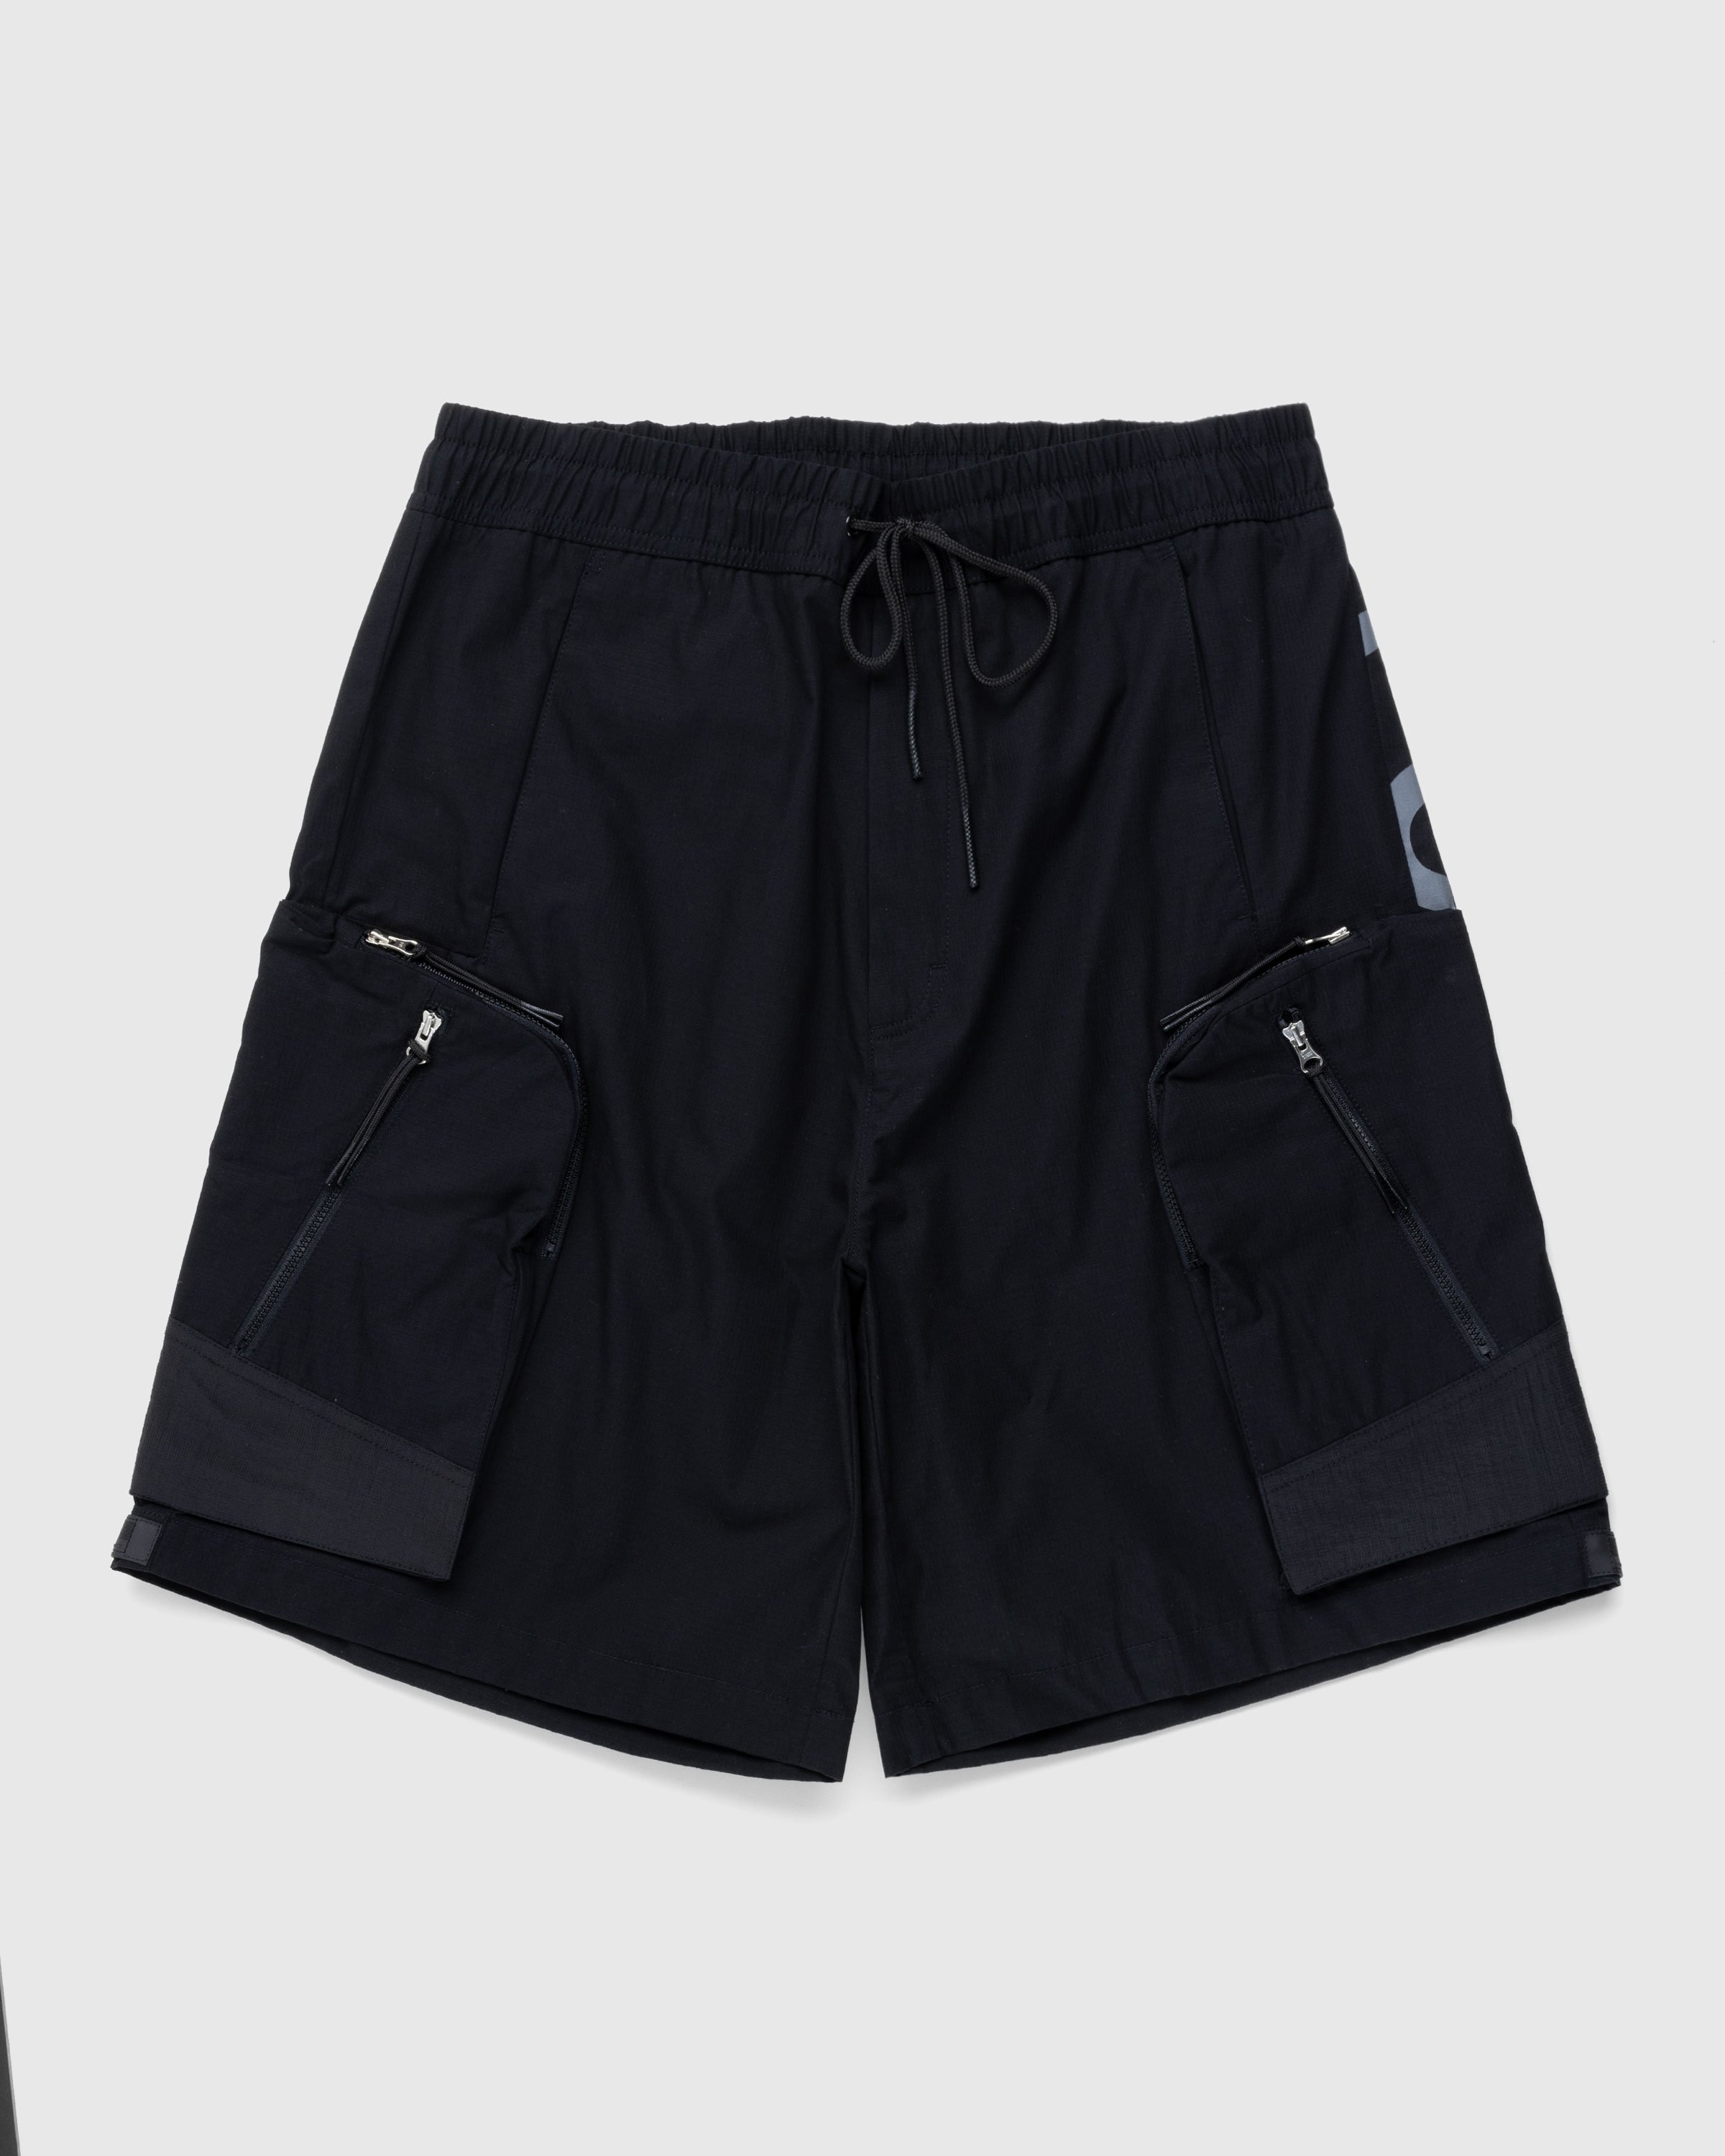 A-Cold-Wall* - Overset Tech Shorts Black - Clothing - Black - Image 1